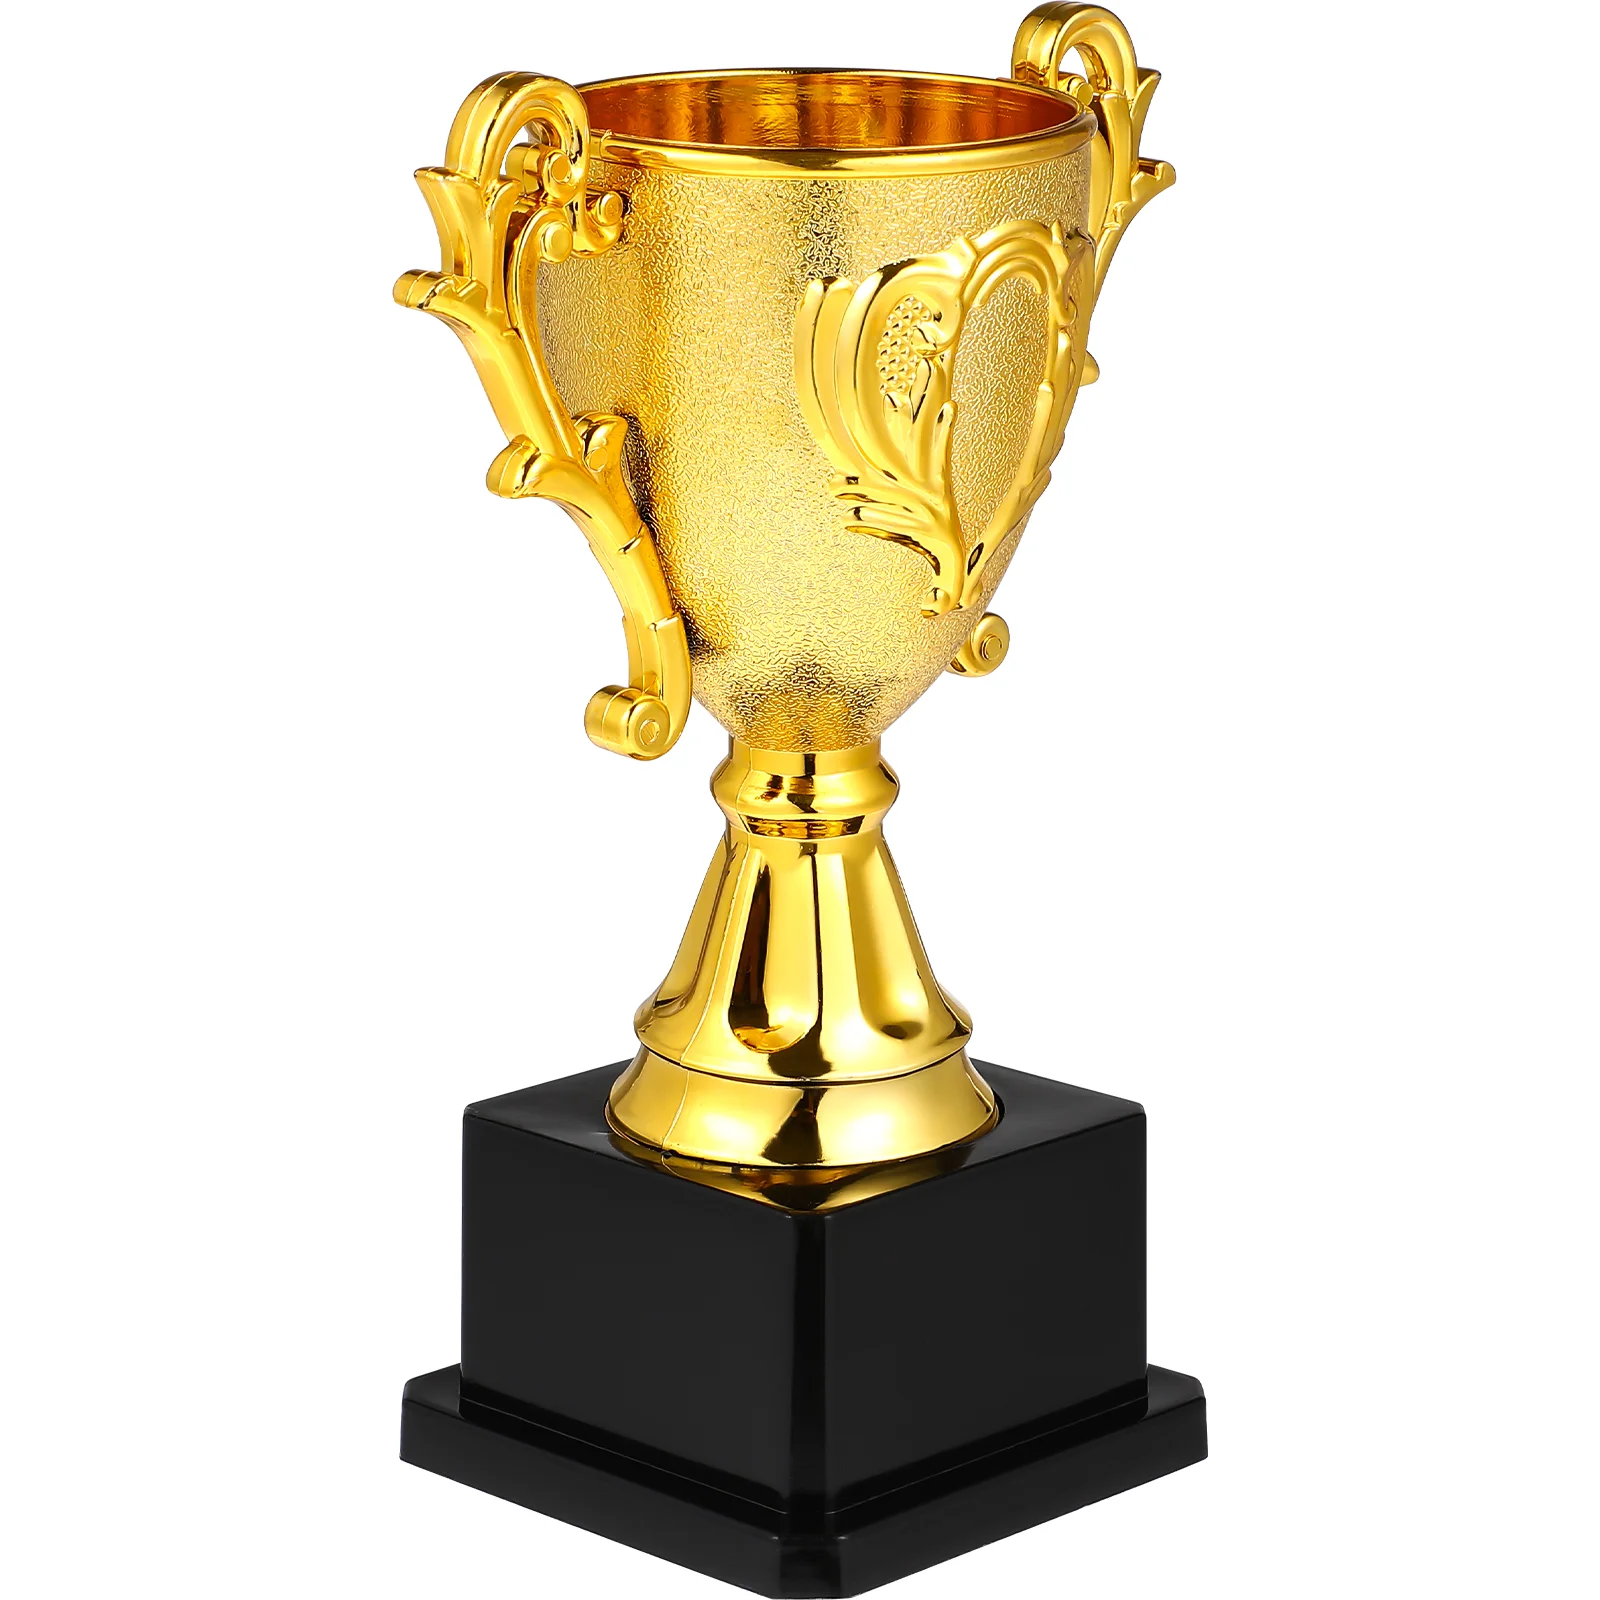 

Winner Trophy Gift Golden Award Trophy Plastic Reward Prizes Toys With Base For Kindergarten School Sports Study Competitions